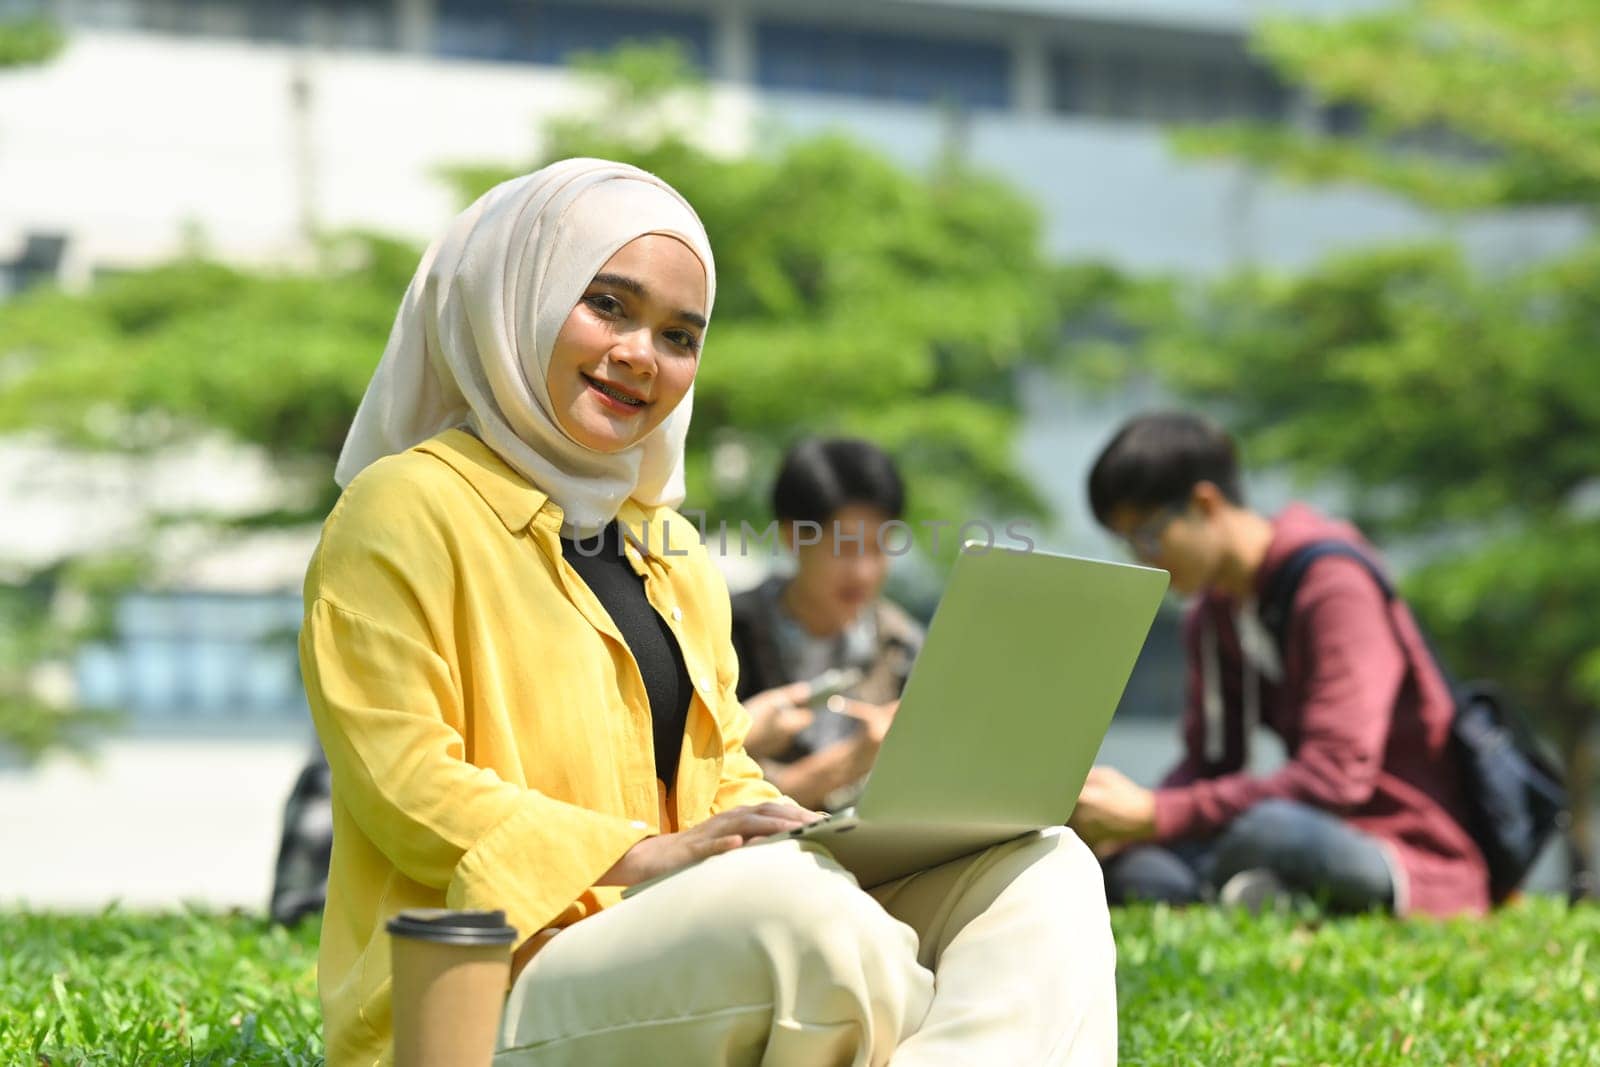 Smiling muslim college student using laptop on green grass in the campus. Education, technology and lifestyle concept.